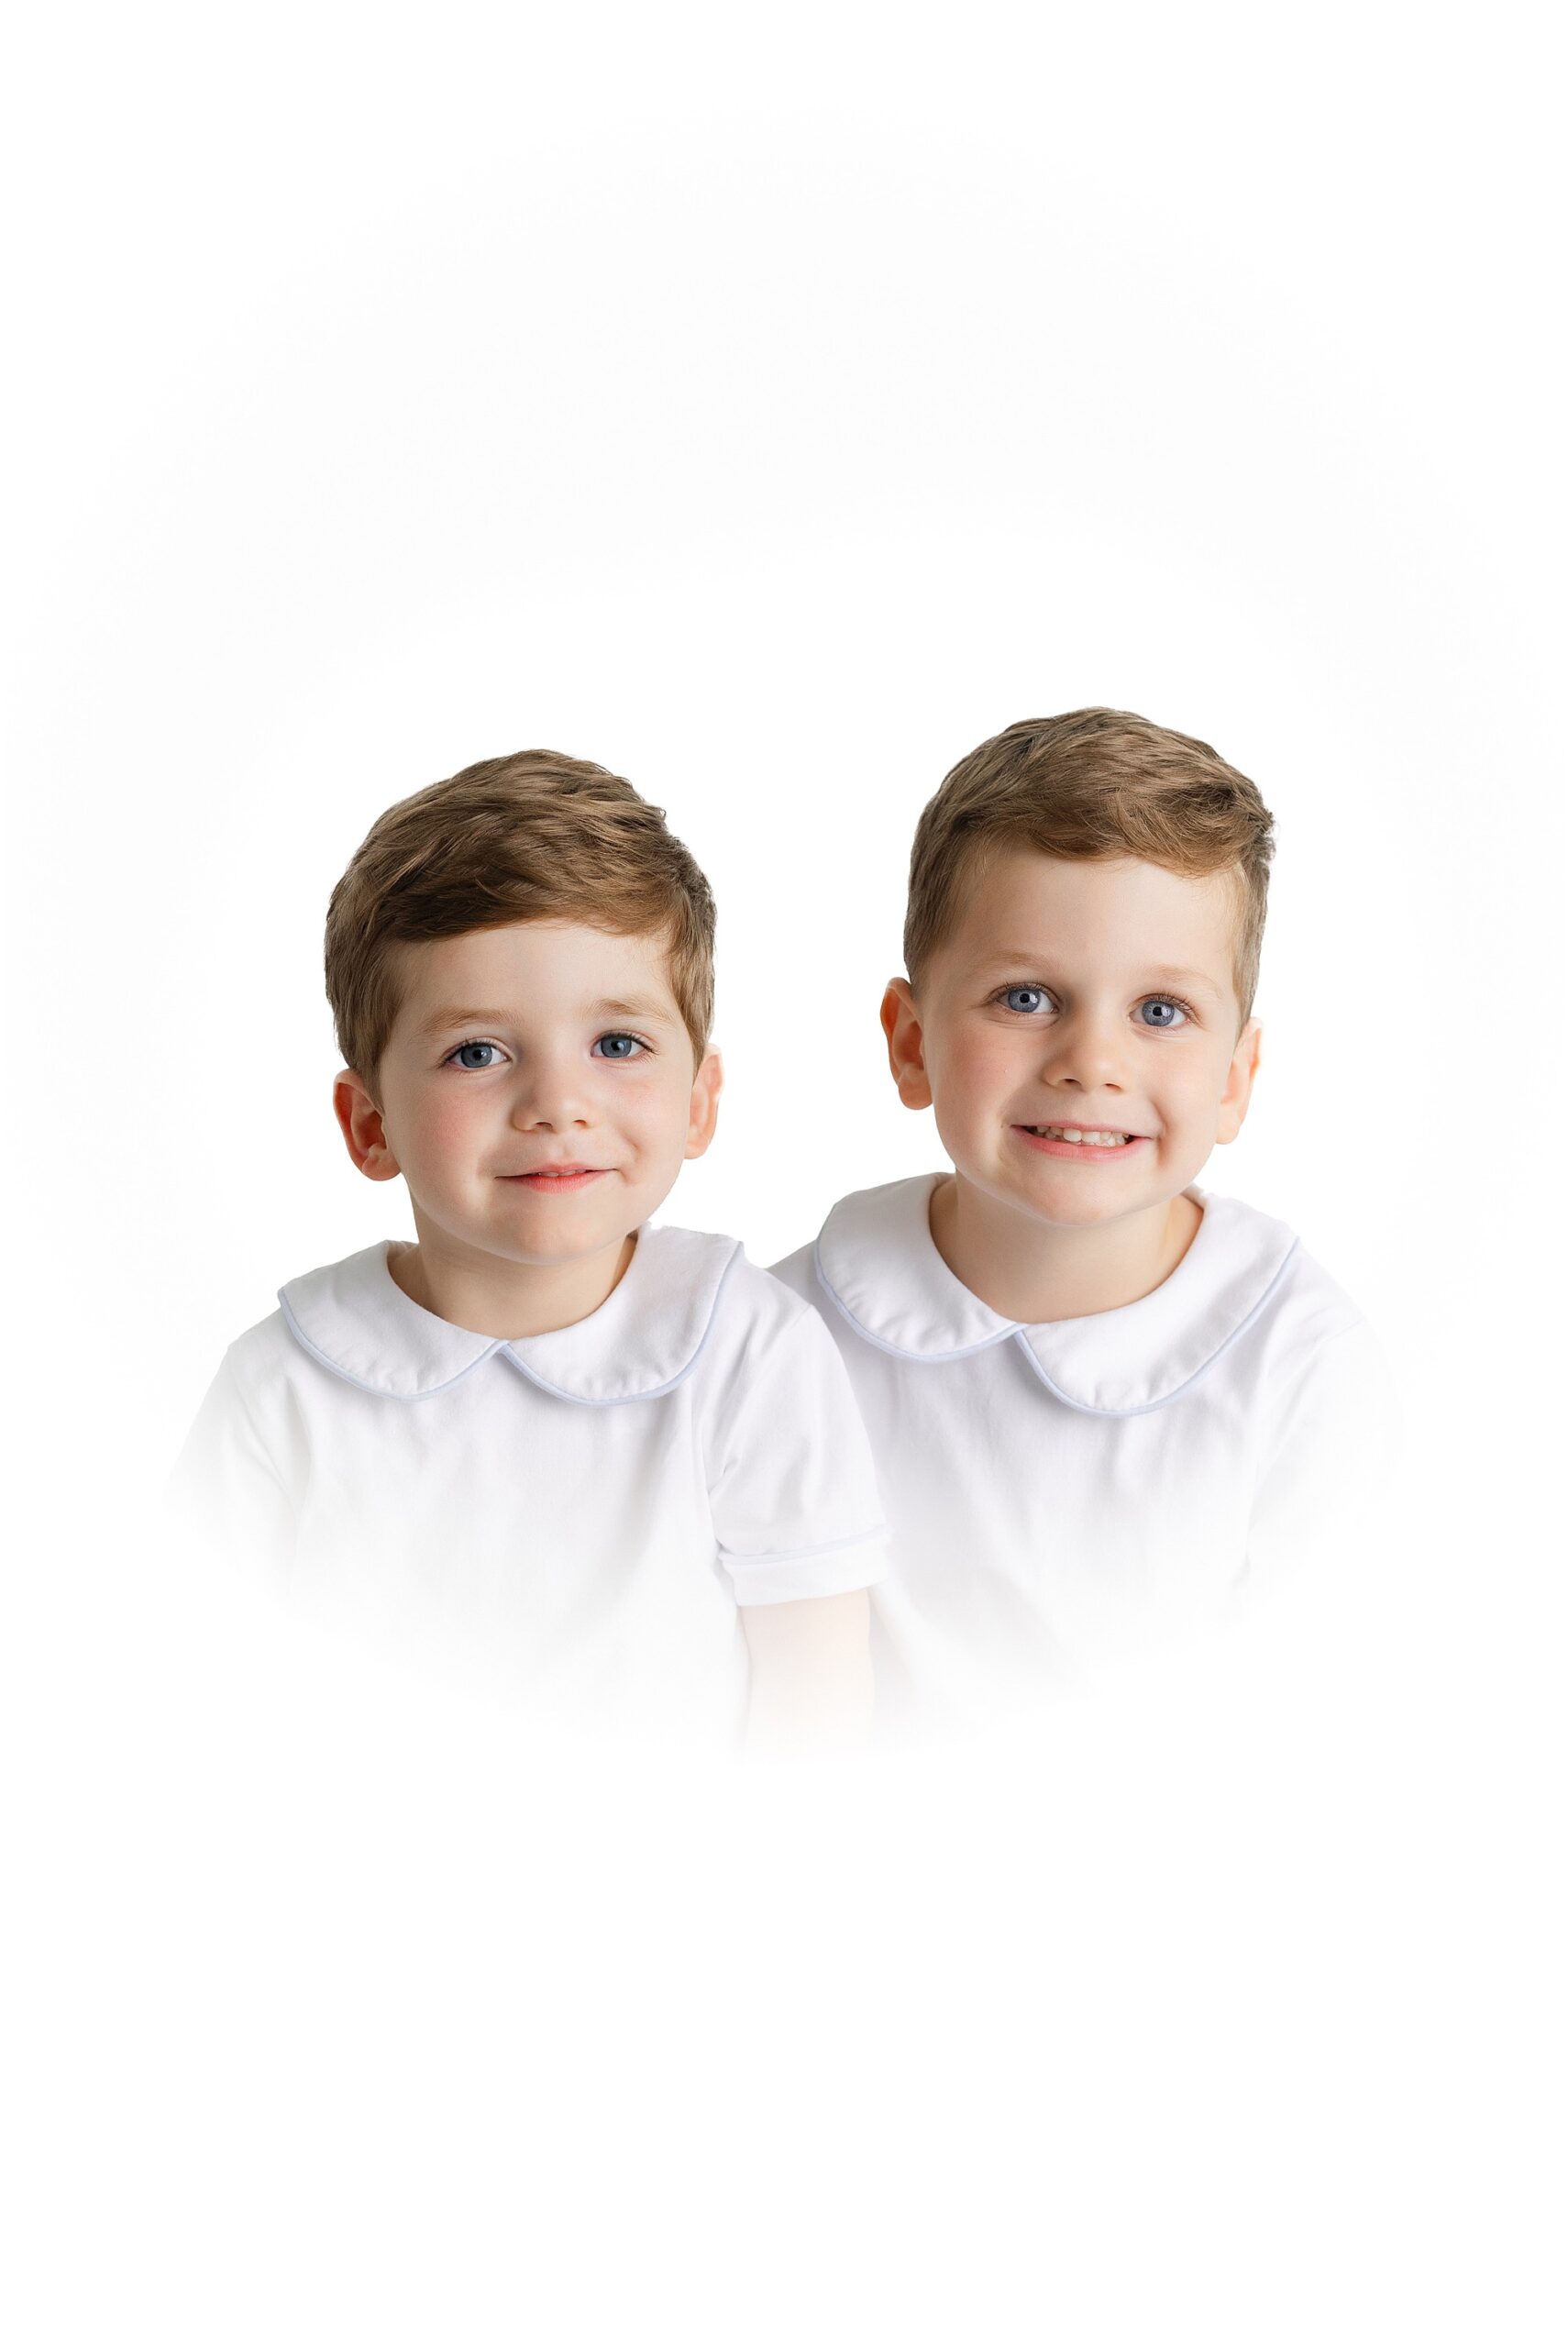 Heirloom portraits in Atlanta of two young boys with a white vignette.